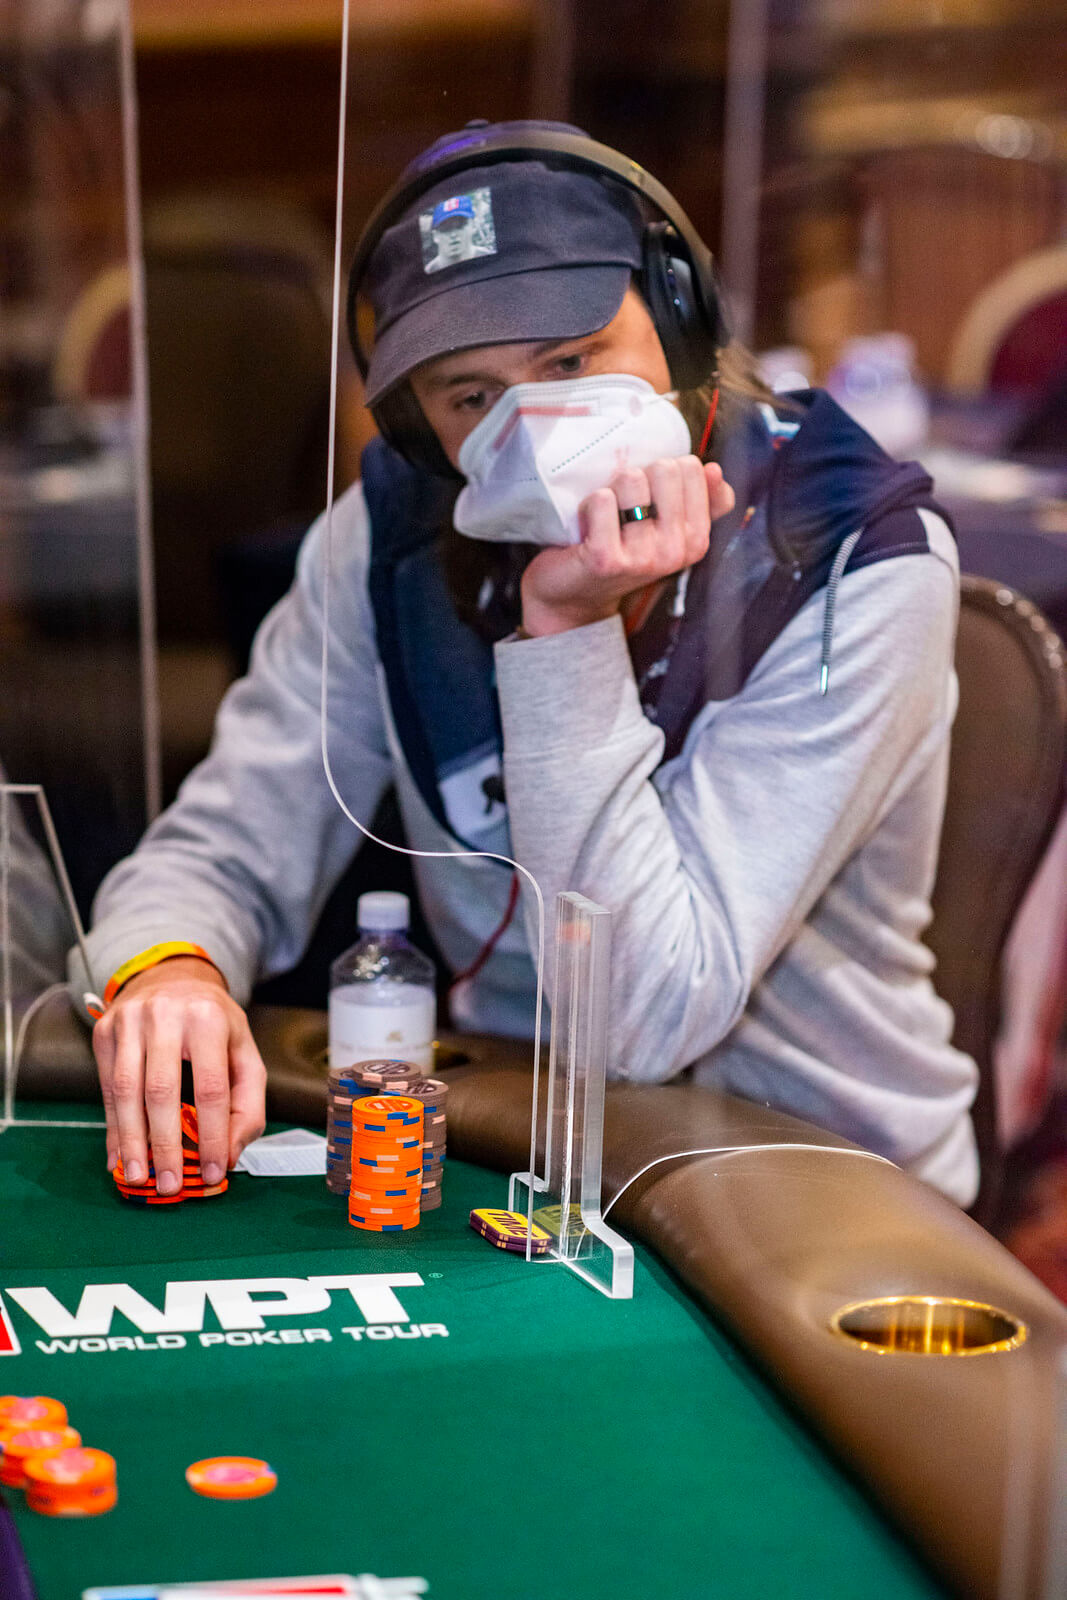 How Roland Rokita faced a decision between losing his testicle and playing a WPT final table